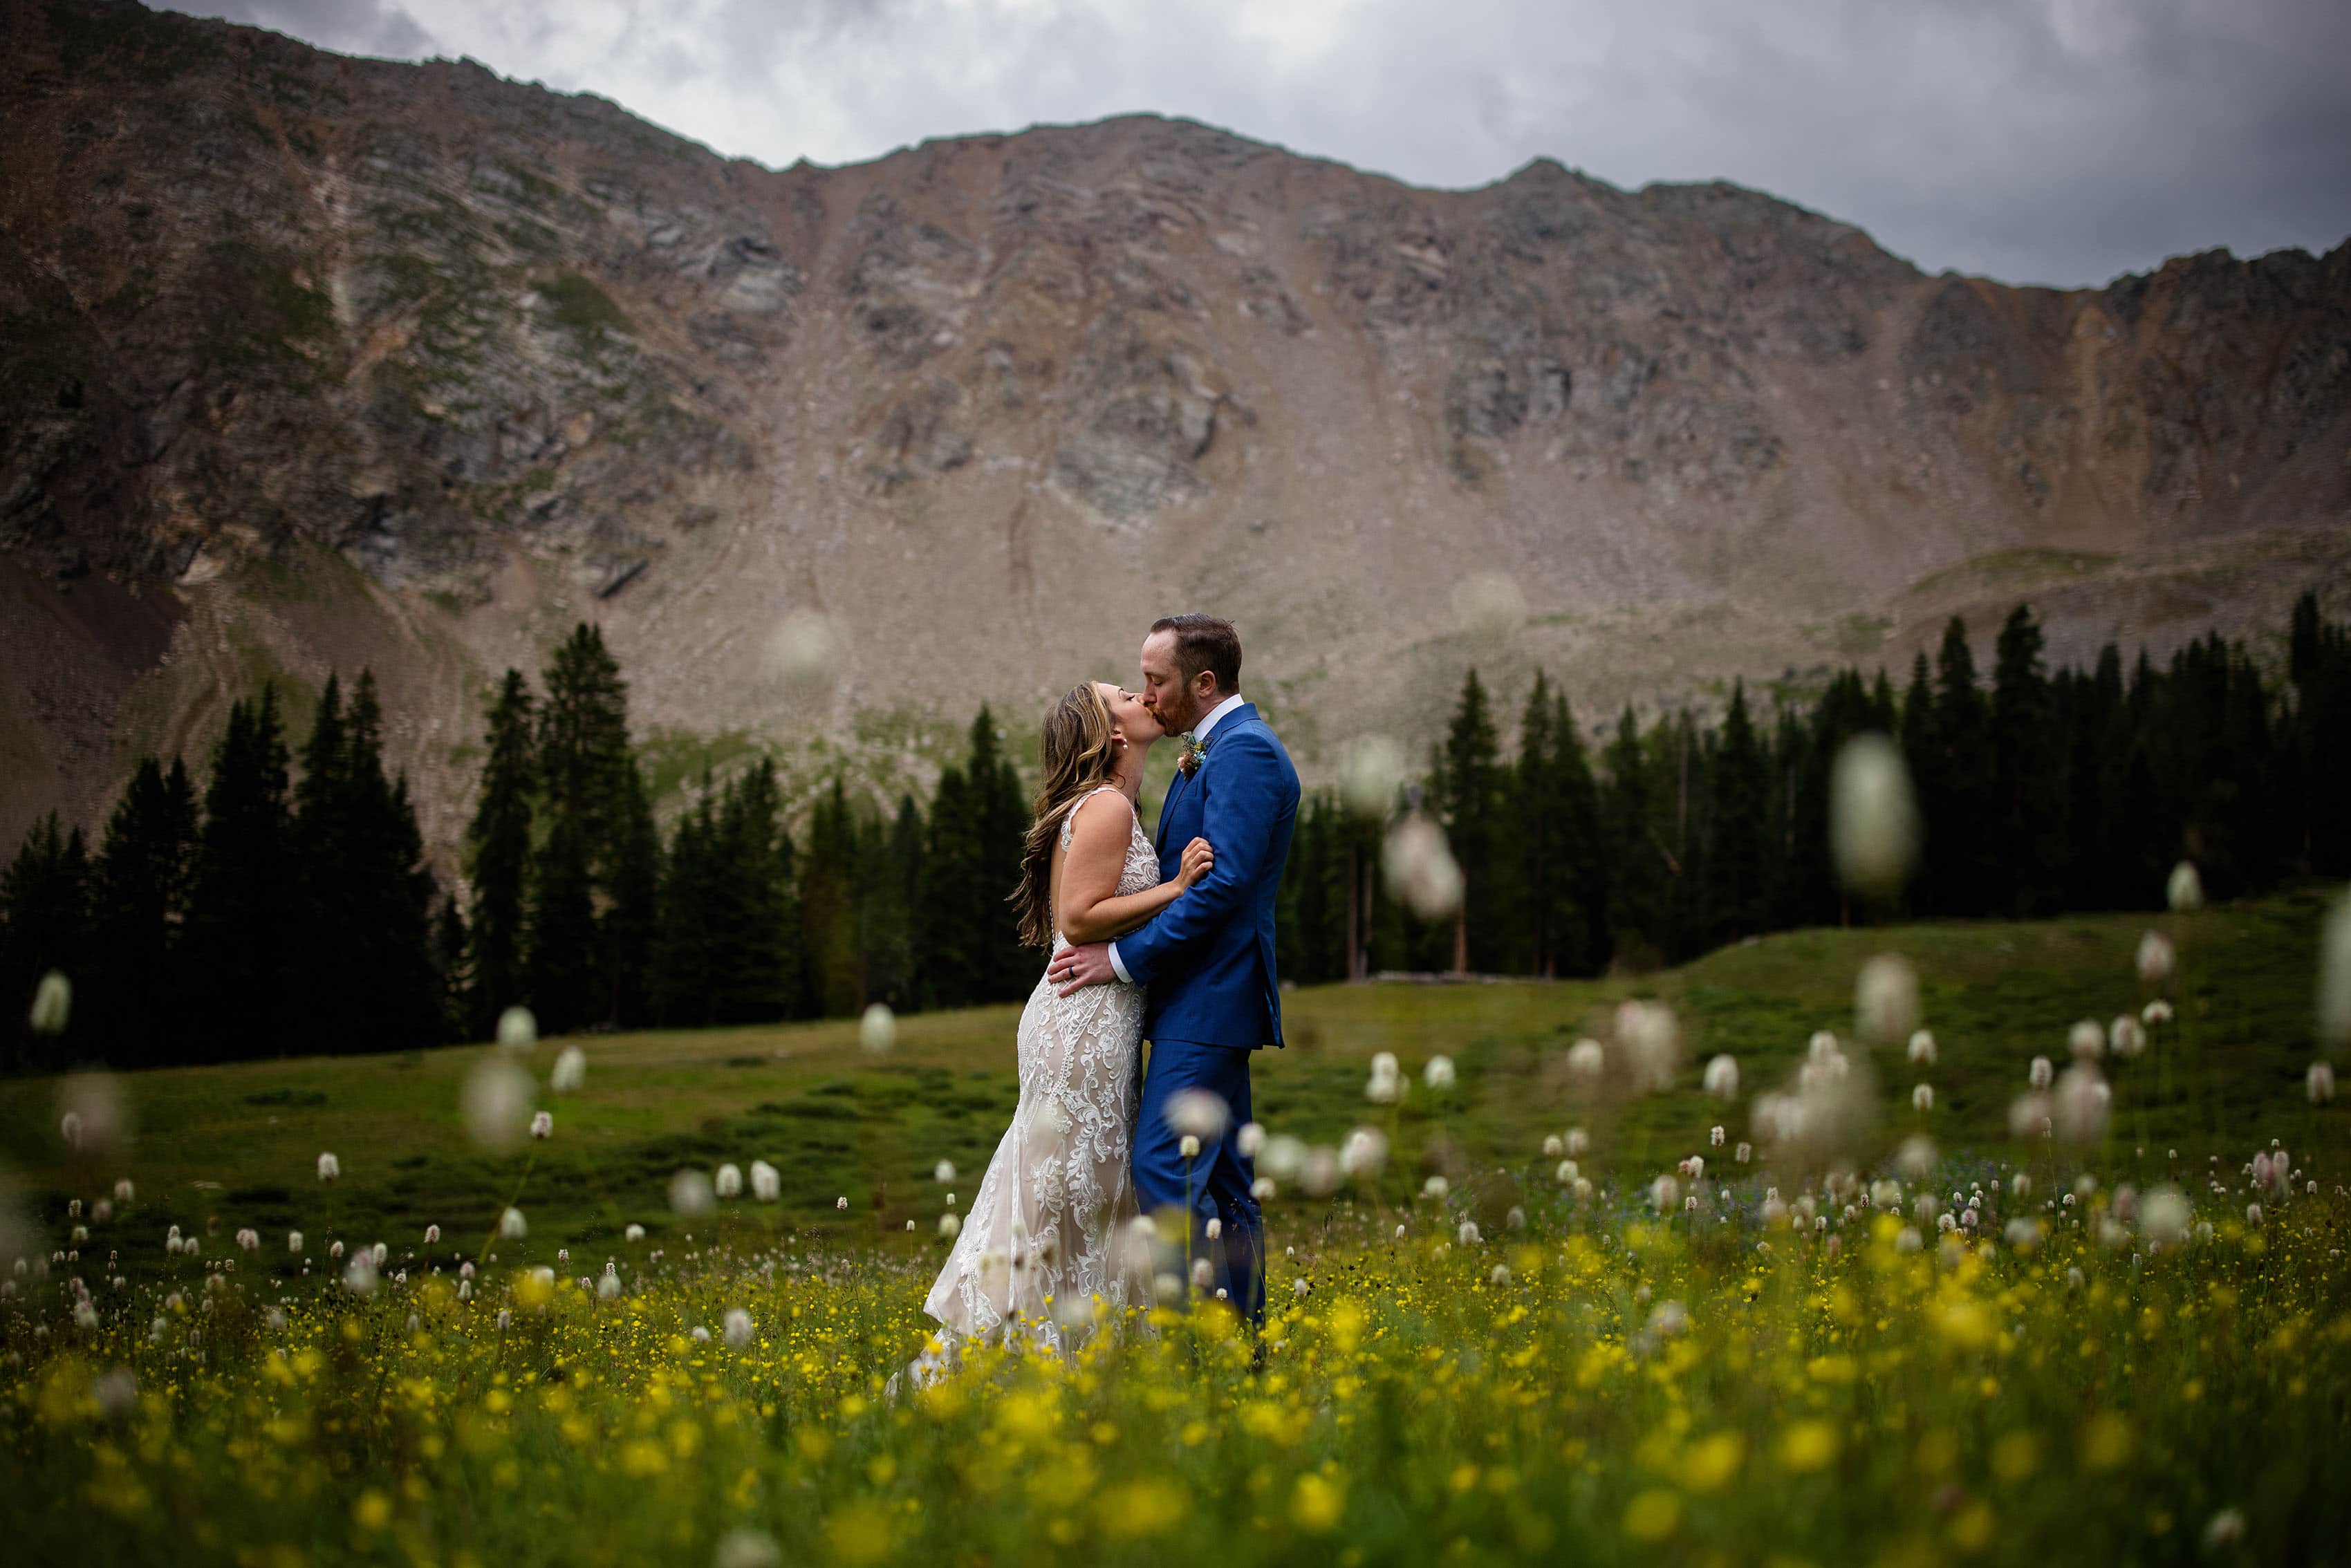 The newlyweds share a kiss in wildflowers at Arapahoe Basin